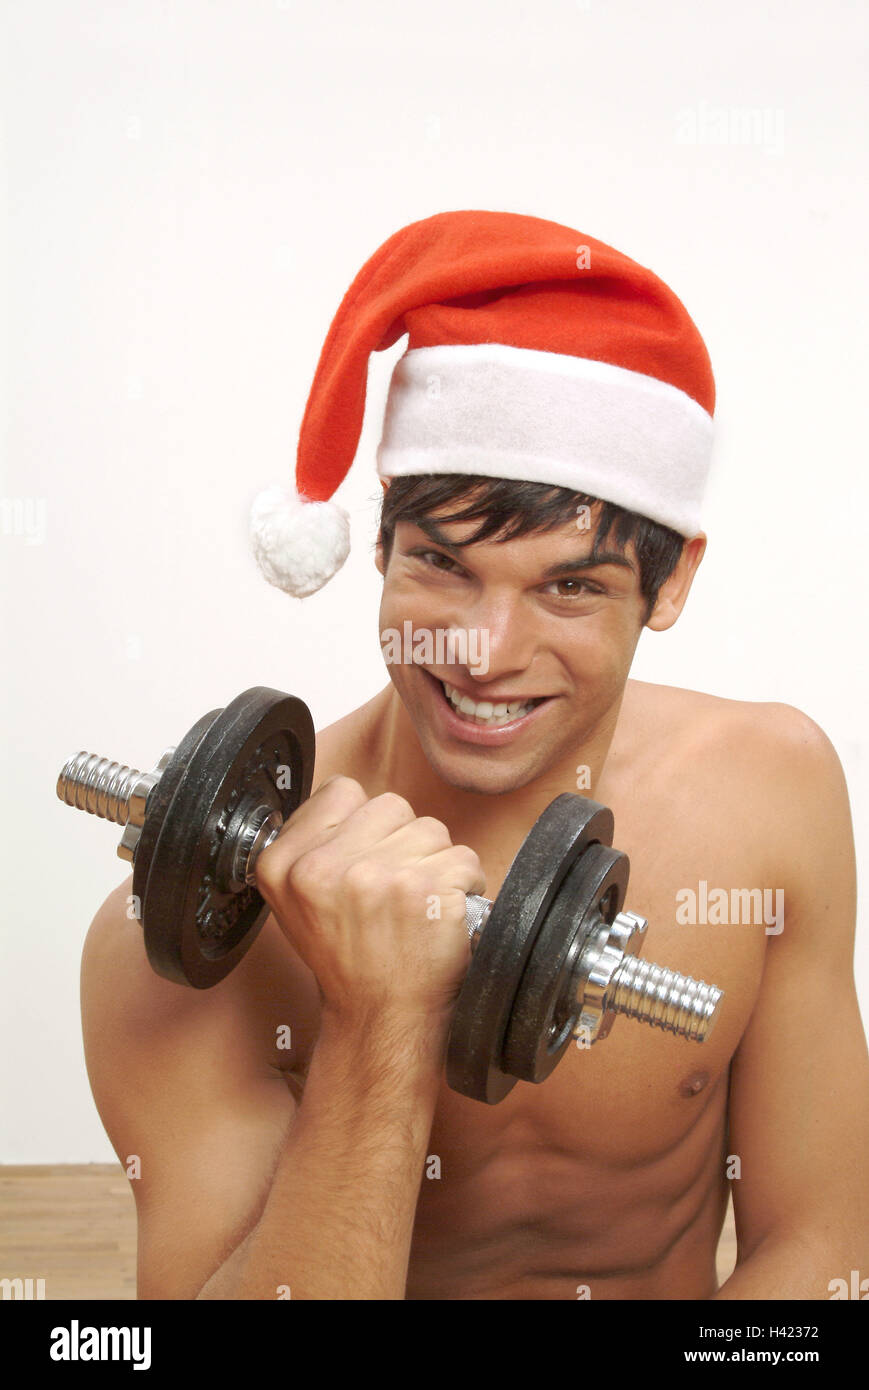 Man, young, smile, free upper part of the body, Santa's hat, dumbbell training, portrait, man's portrait, 20-30 years, dark-haired, well-trained, training, muscle training, weight training, dumbbell, short dumbbell, force, strain, Santa Claus, Santa, Sant Stock Photo